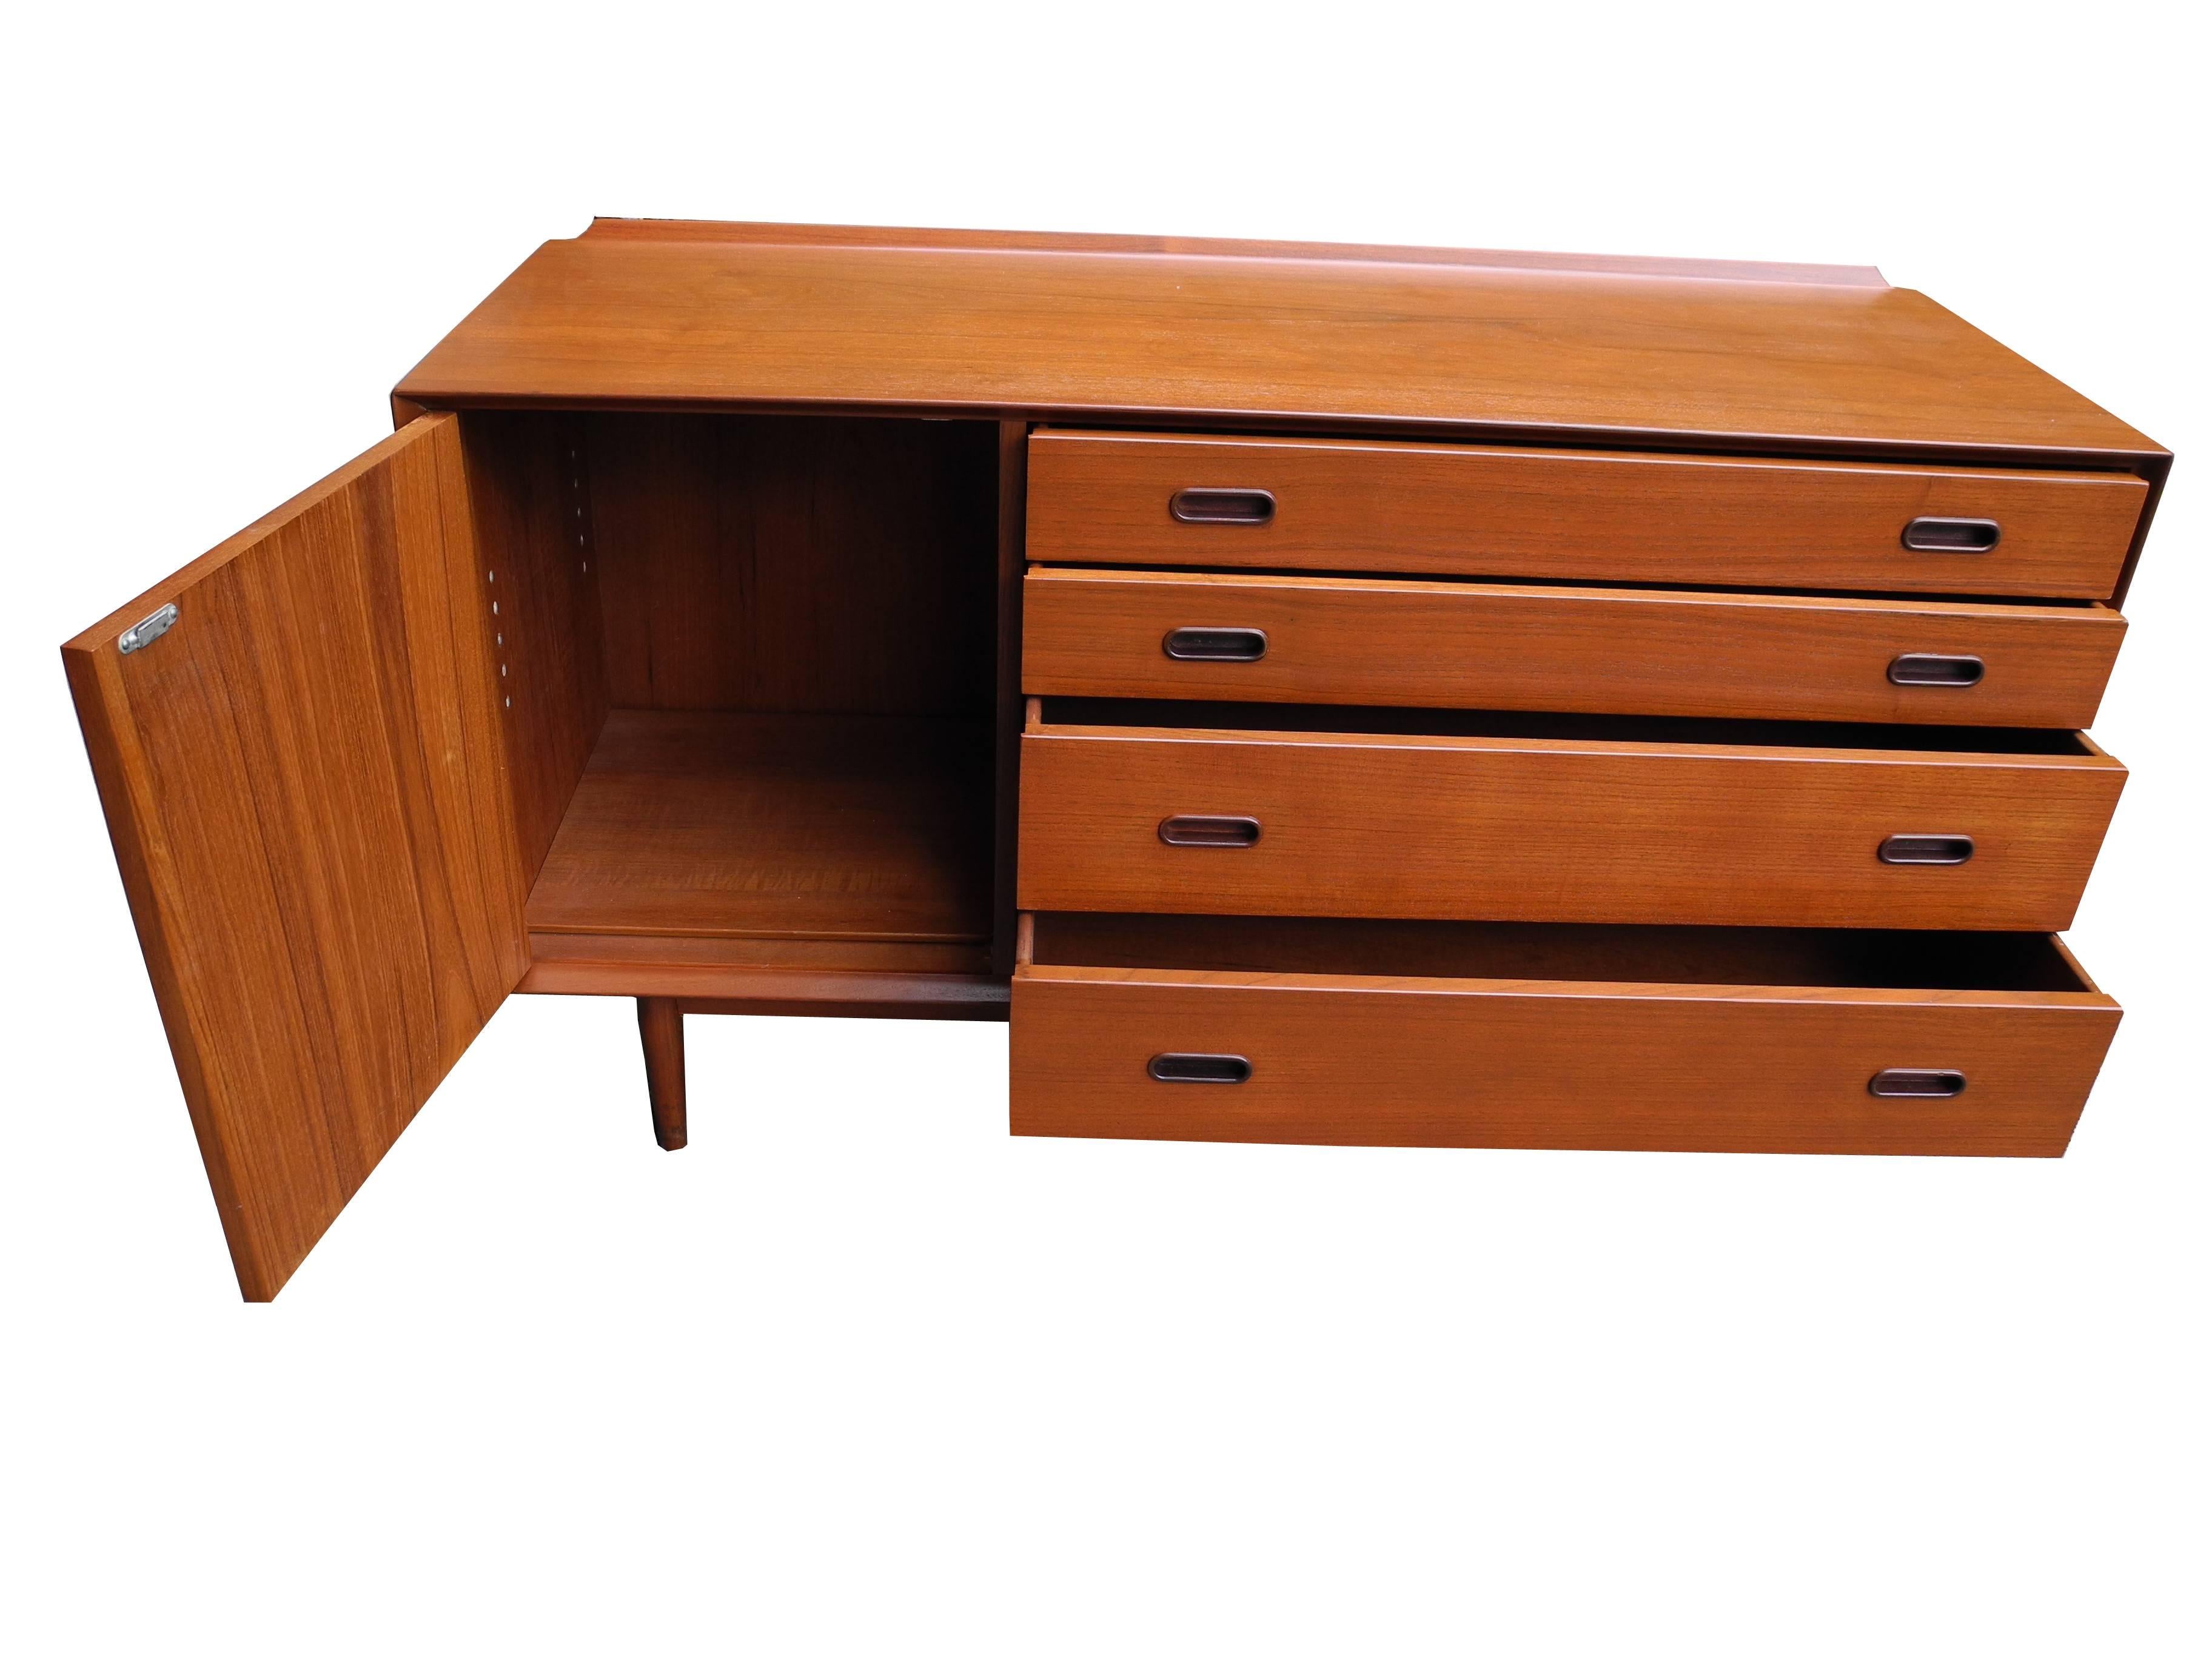 Danish Mid-Century Modern Teak, Drawers and Cabinet Sideboard by Arne Vodder In Good Condition For Sale In Hudson, NY